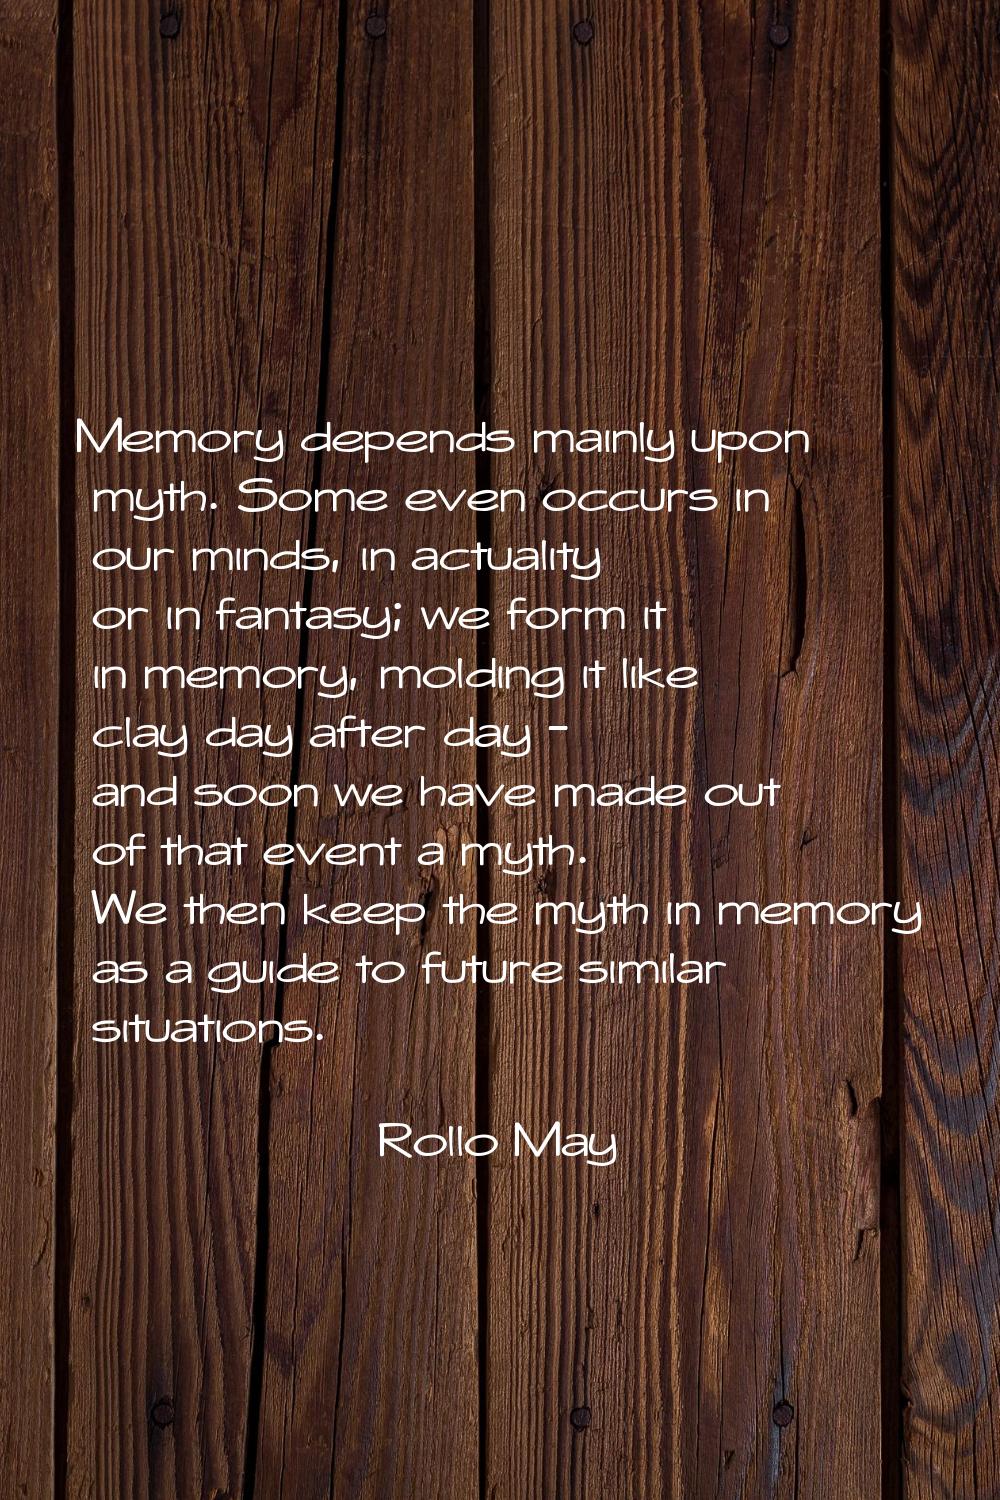 Memory depends mainly upon myth. Some even occurs in our minds, in actuality or in fantasy; we form